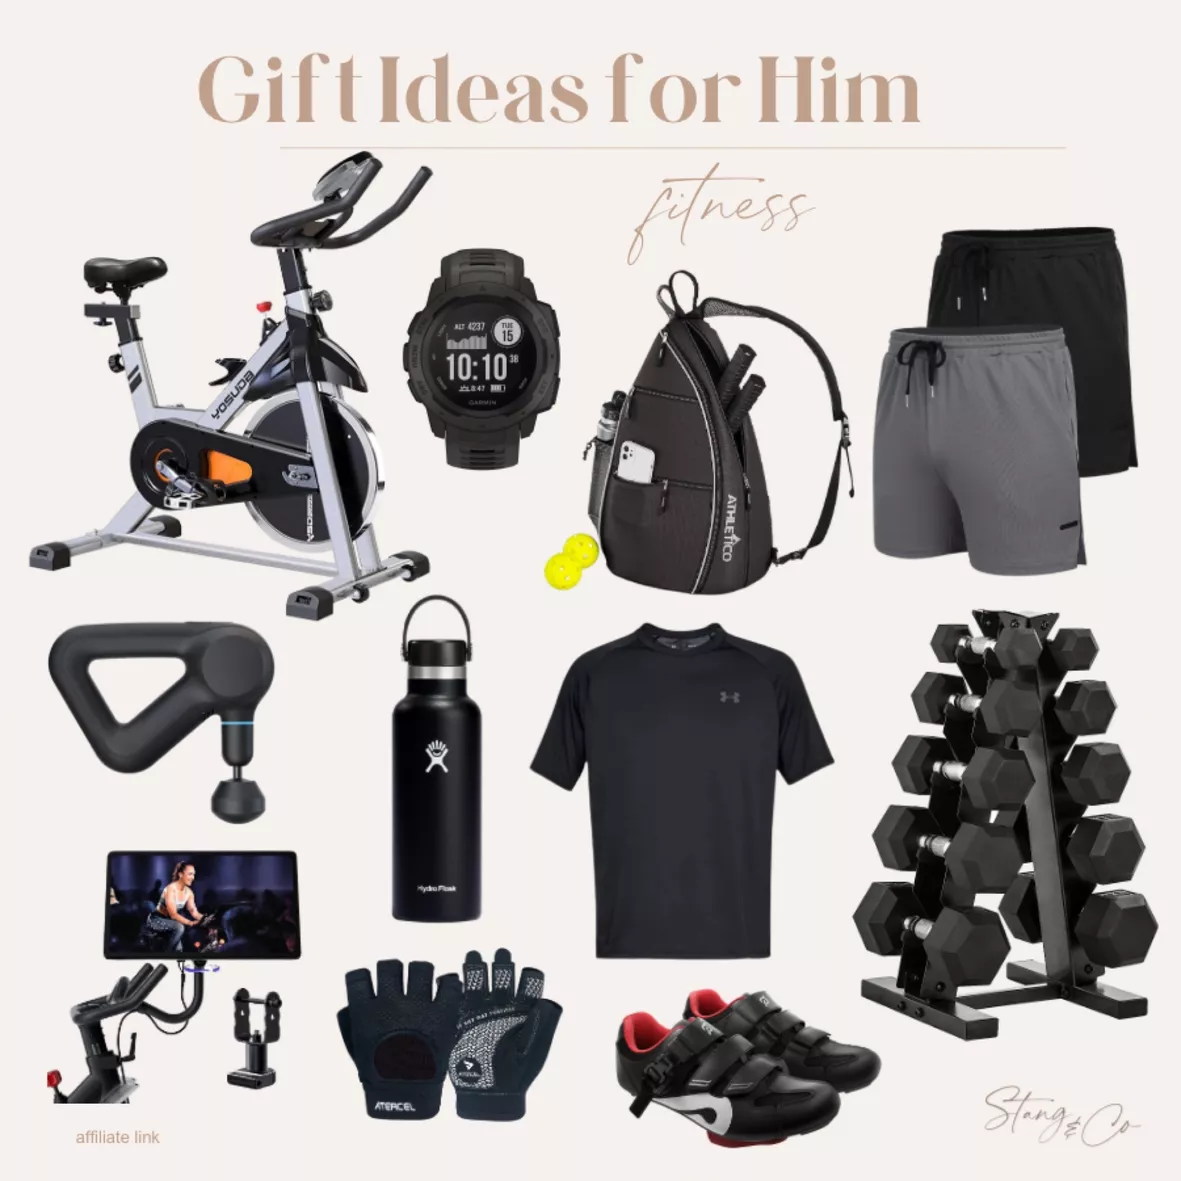 Fitness Gift Guide: 10 Workout Gifts for Her